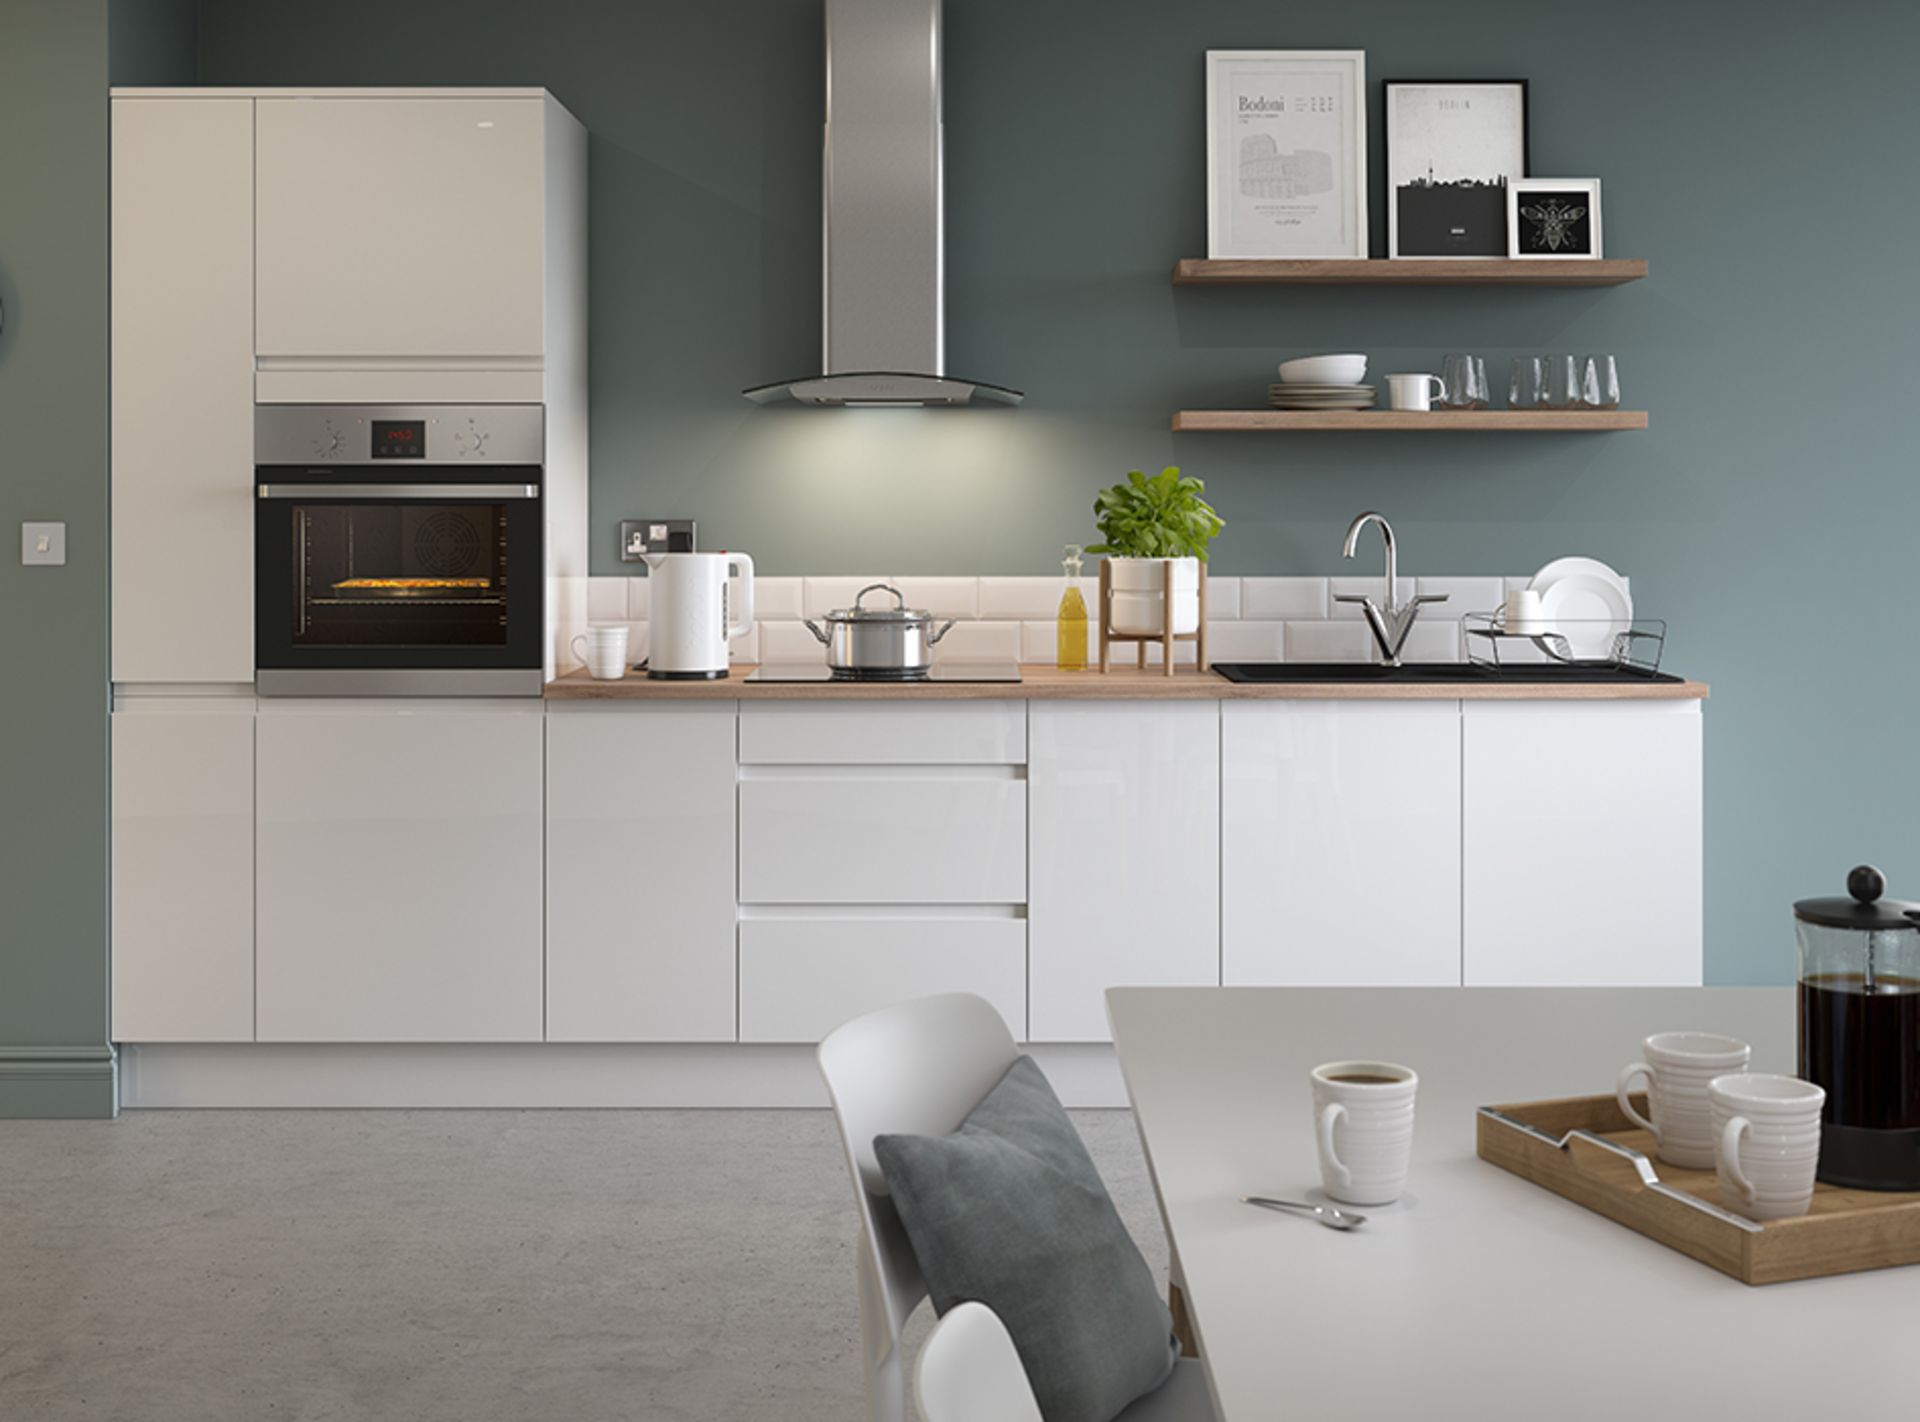 Circa 4,664 items of Kitchen Goods from the following ranges: Gloss White, Gloss Cream, Sandford